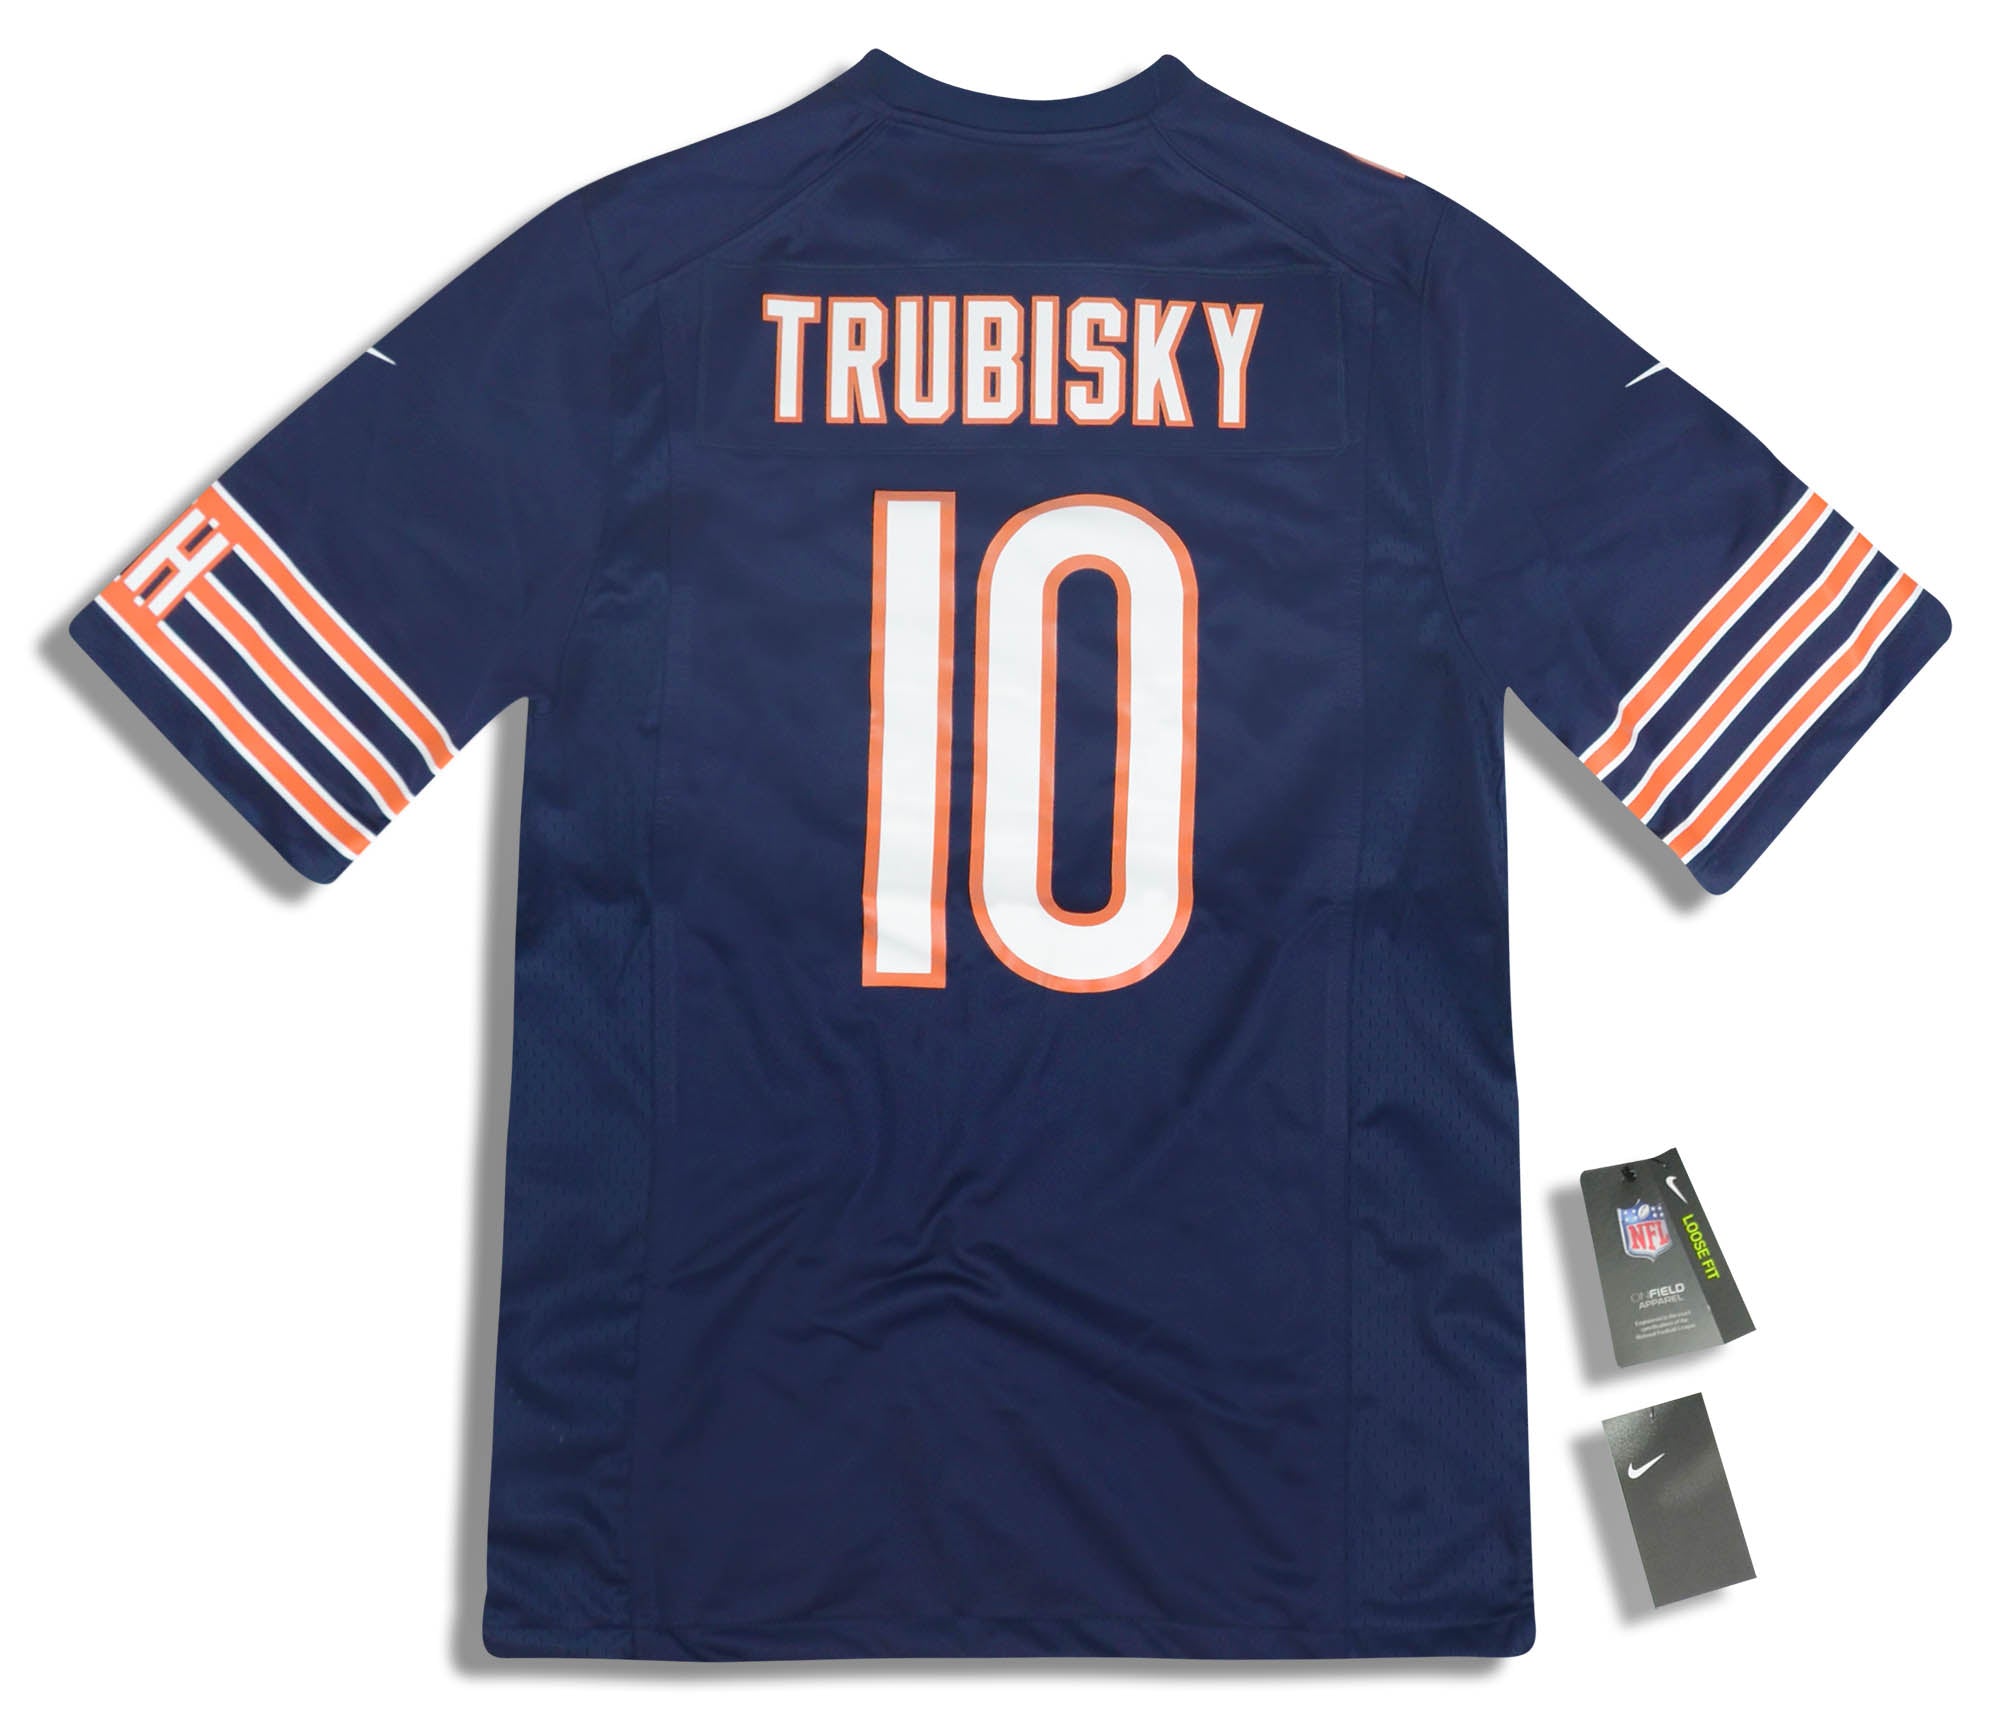 2018-19 CHICAGO BEARS TRUBISKY #10 NIKE GAME JERSEY (HOME) S - W/TAGS